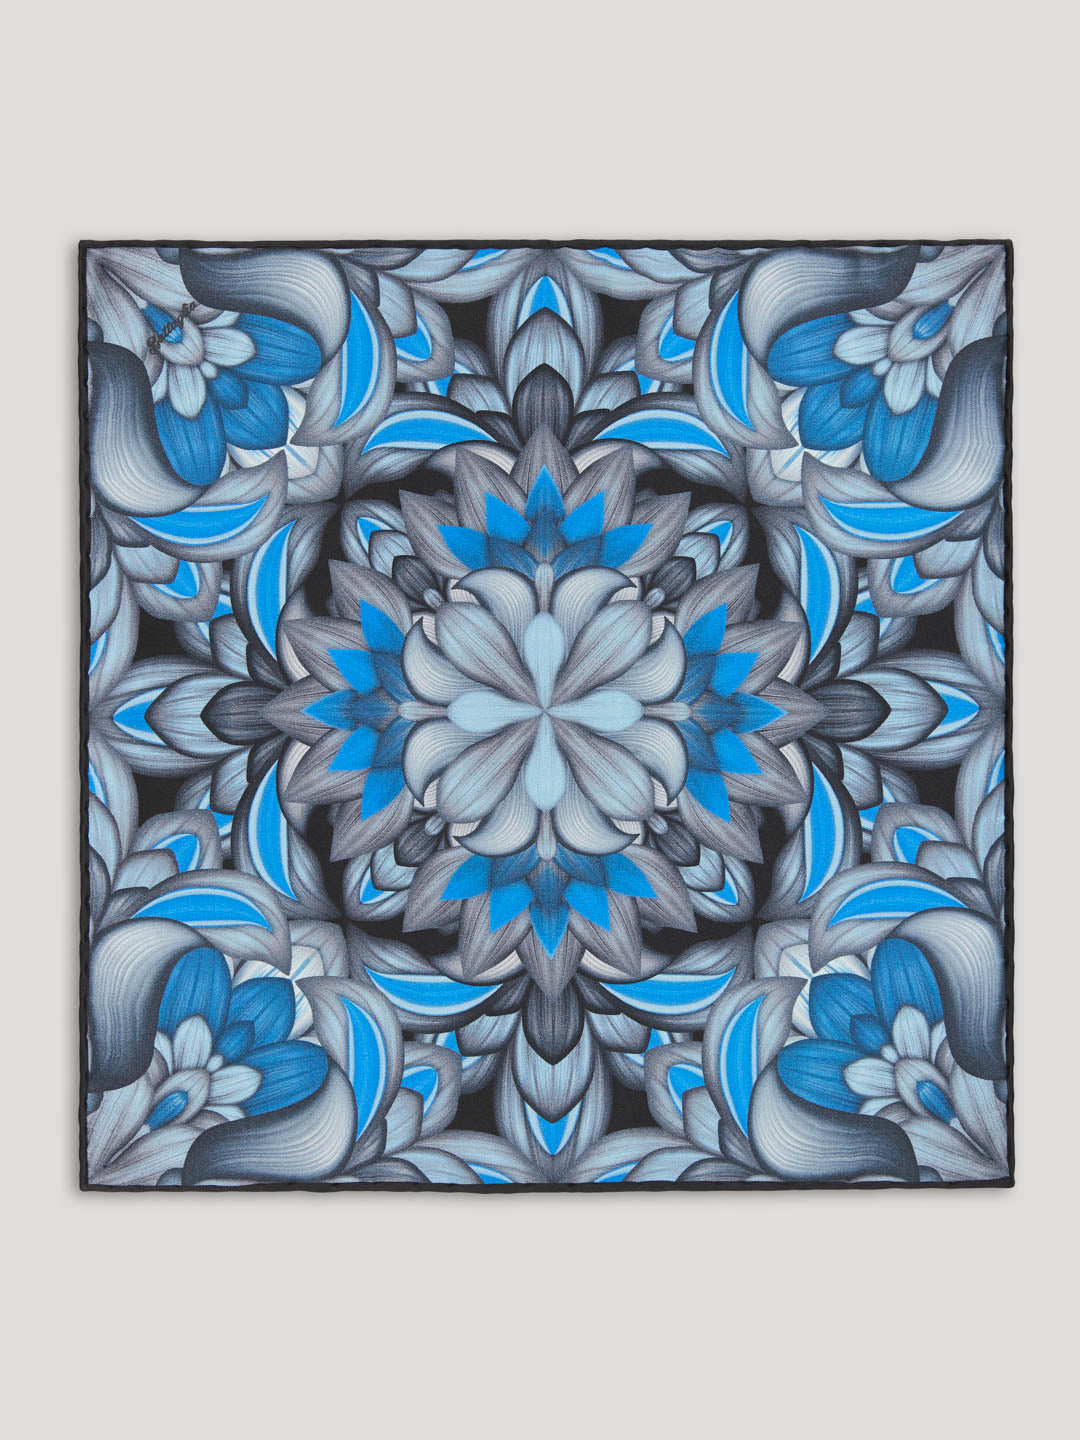 Black, blue, and gray handkerchief with intricate floral design. 